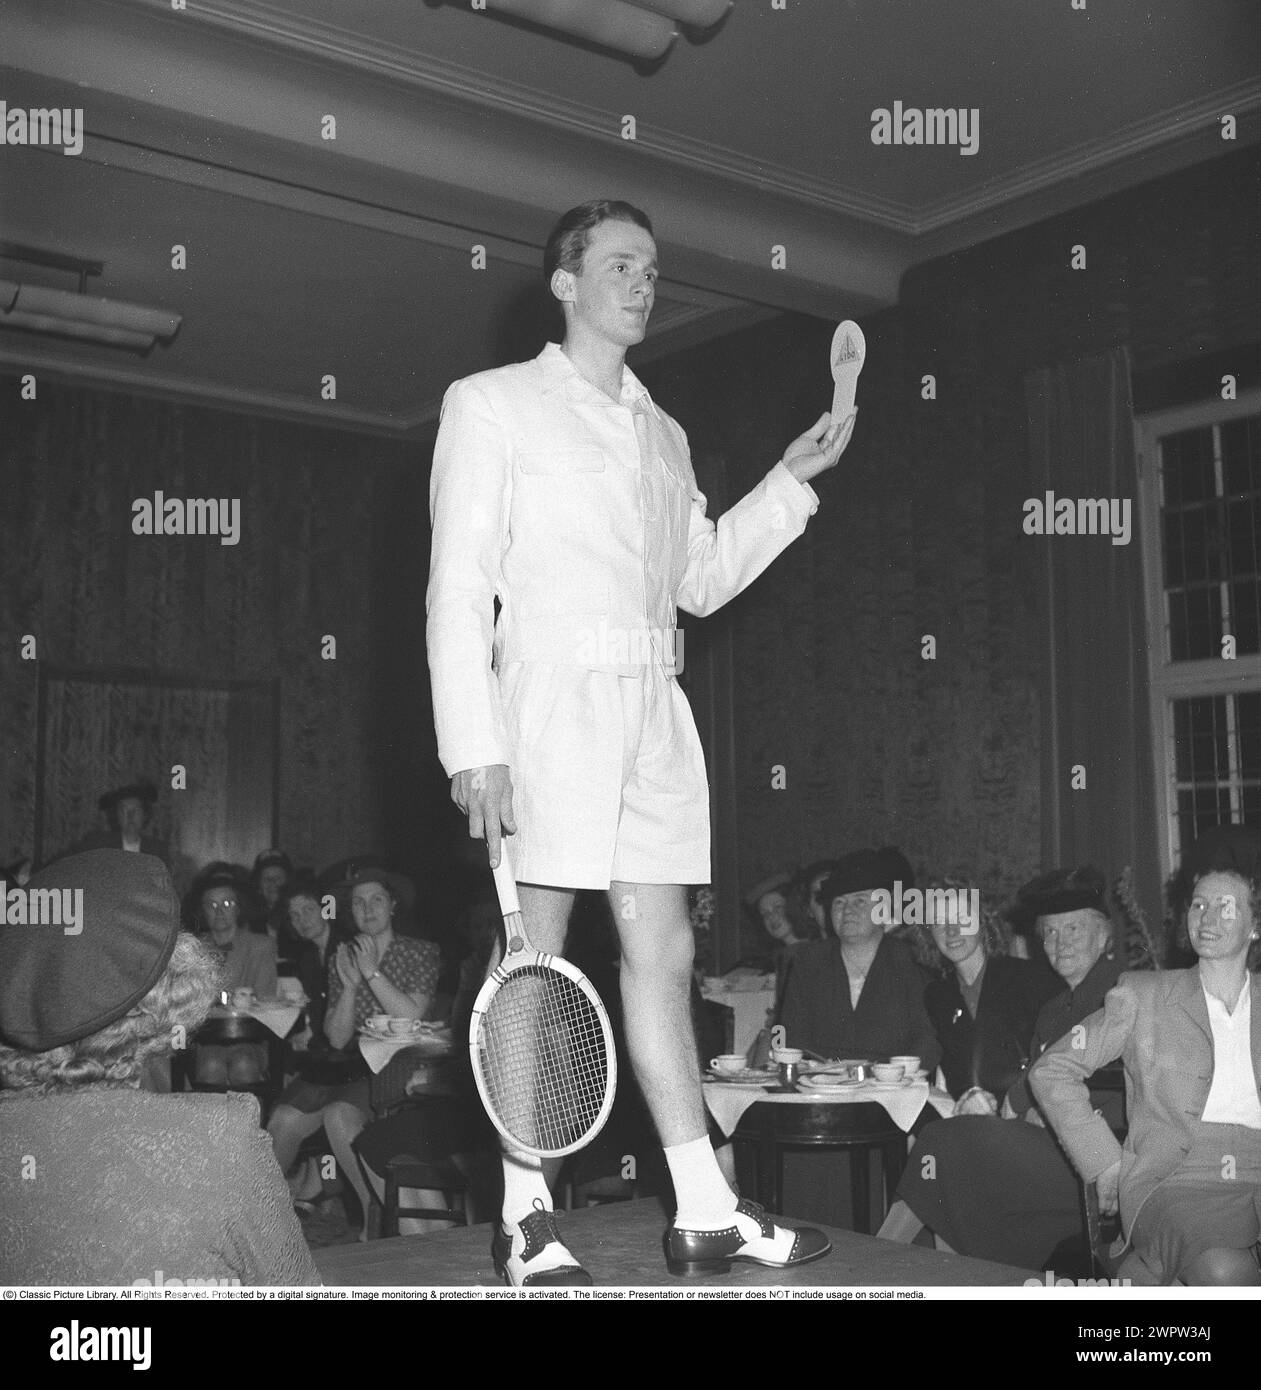 Fashion show in the 1940s. A young dark haired male model at a fashion show shows off a pair of trendy tennis pants and matching white jacket with a tennis racket in hand. The all-female audience views the garment and the man from top to bottom. 1946 Kristoffersson ref U1-1 Stock Photo